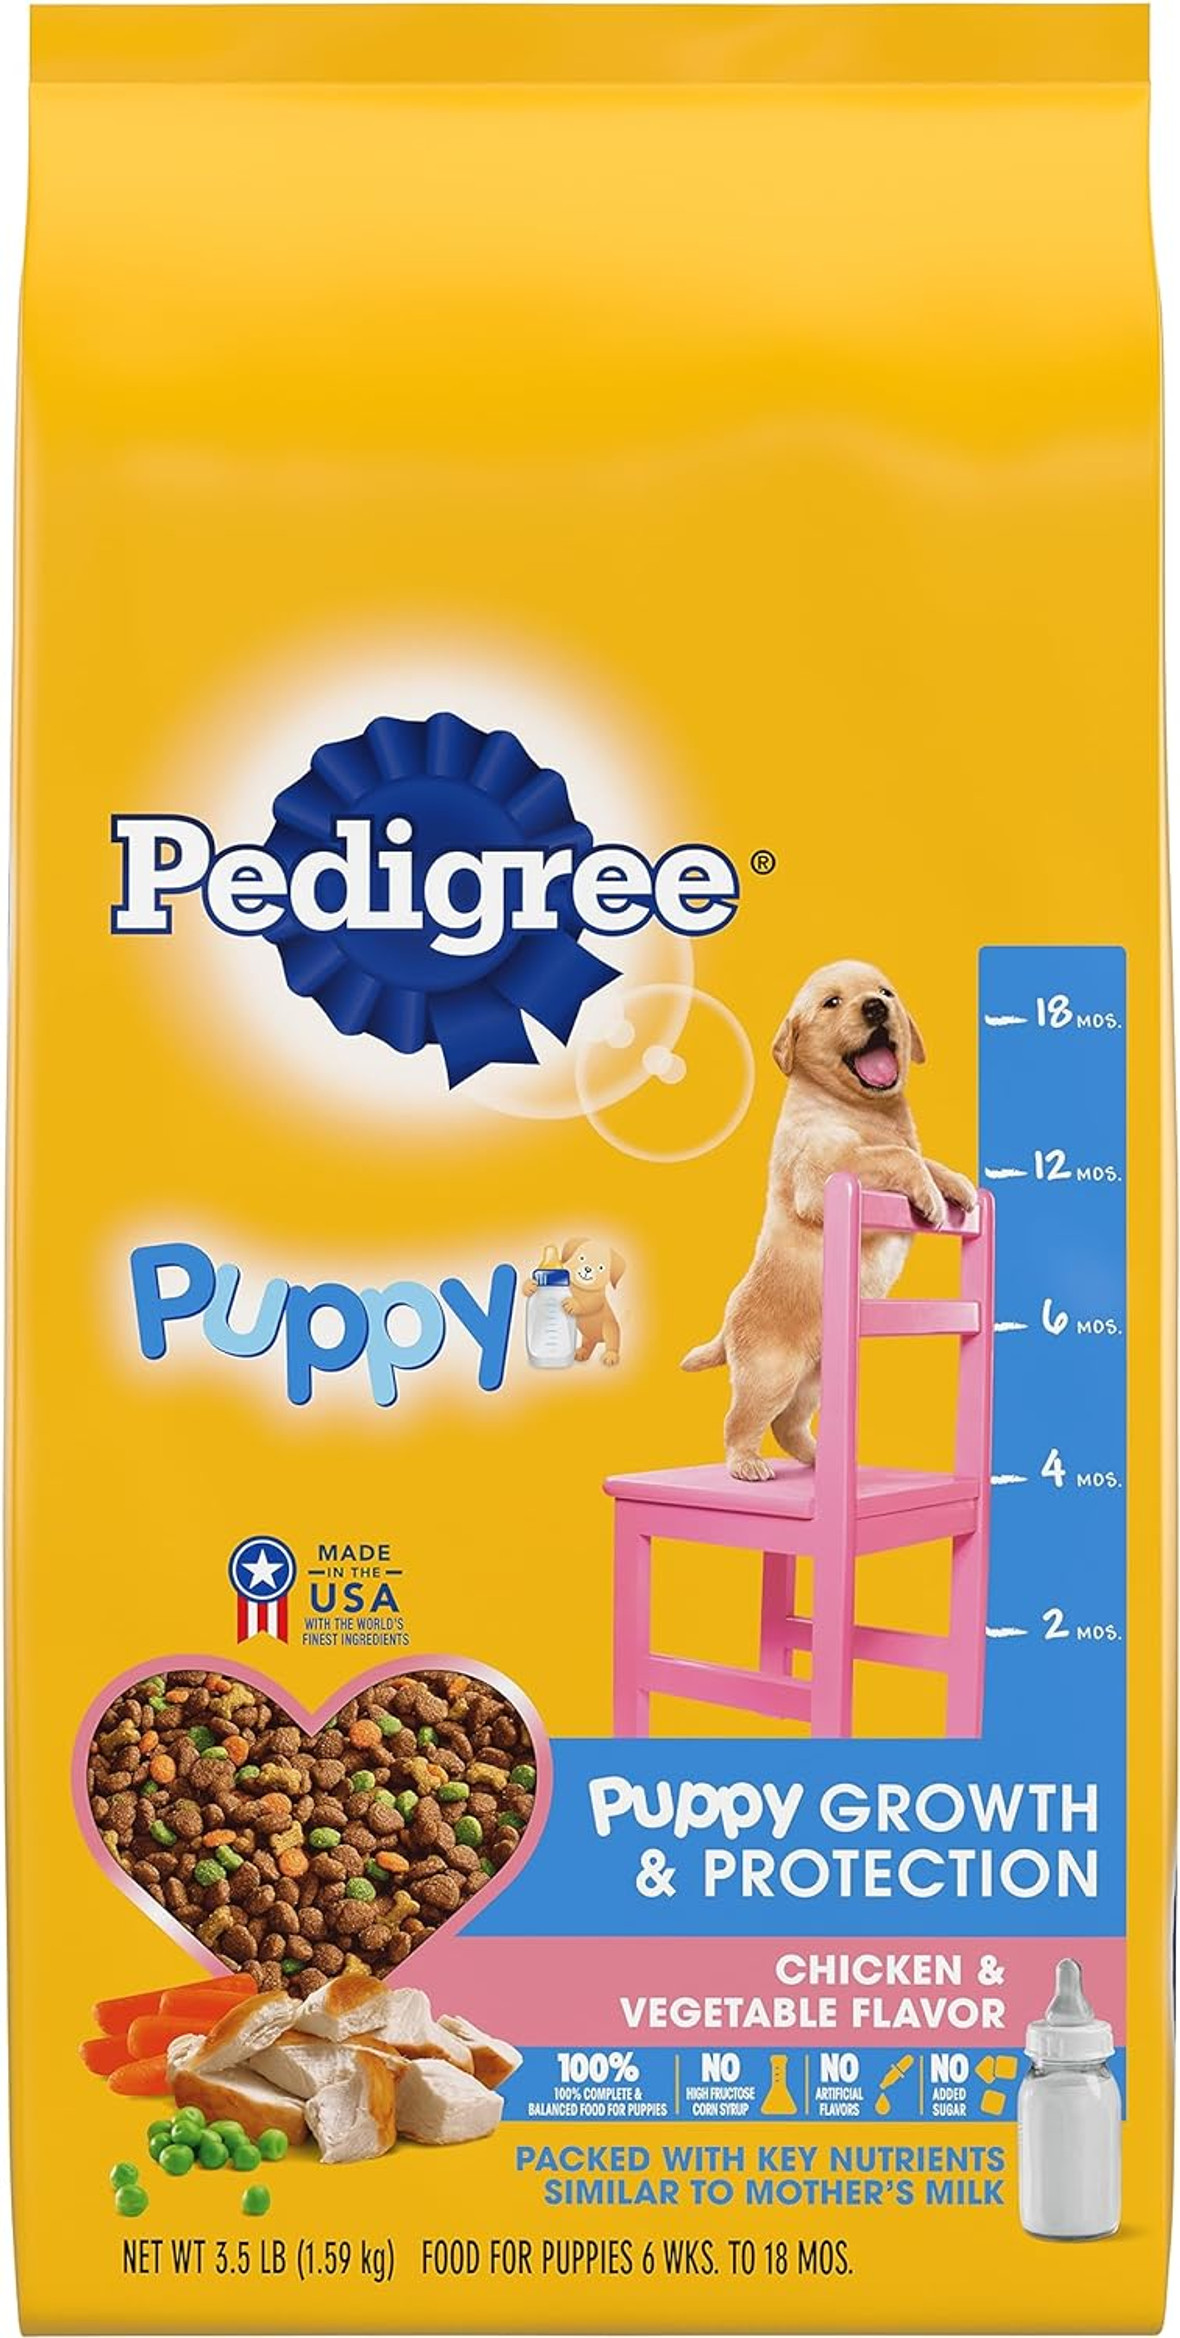 Pedigree Puppy Growth & Protection Dry Dog Food Chicken & Vegetable Flavor, 3.5 pounds